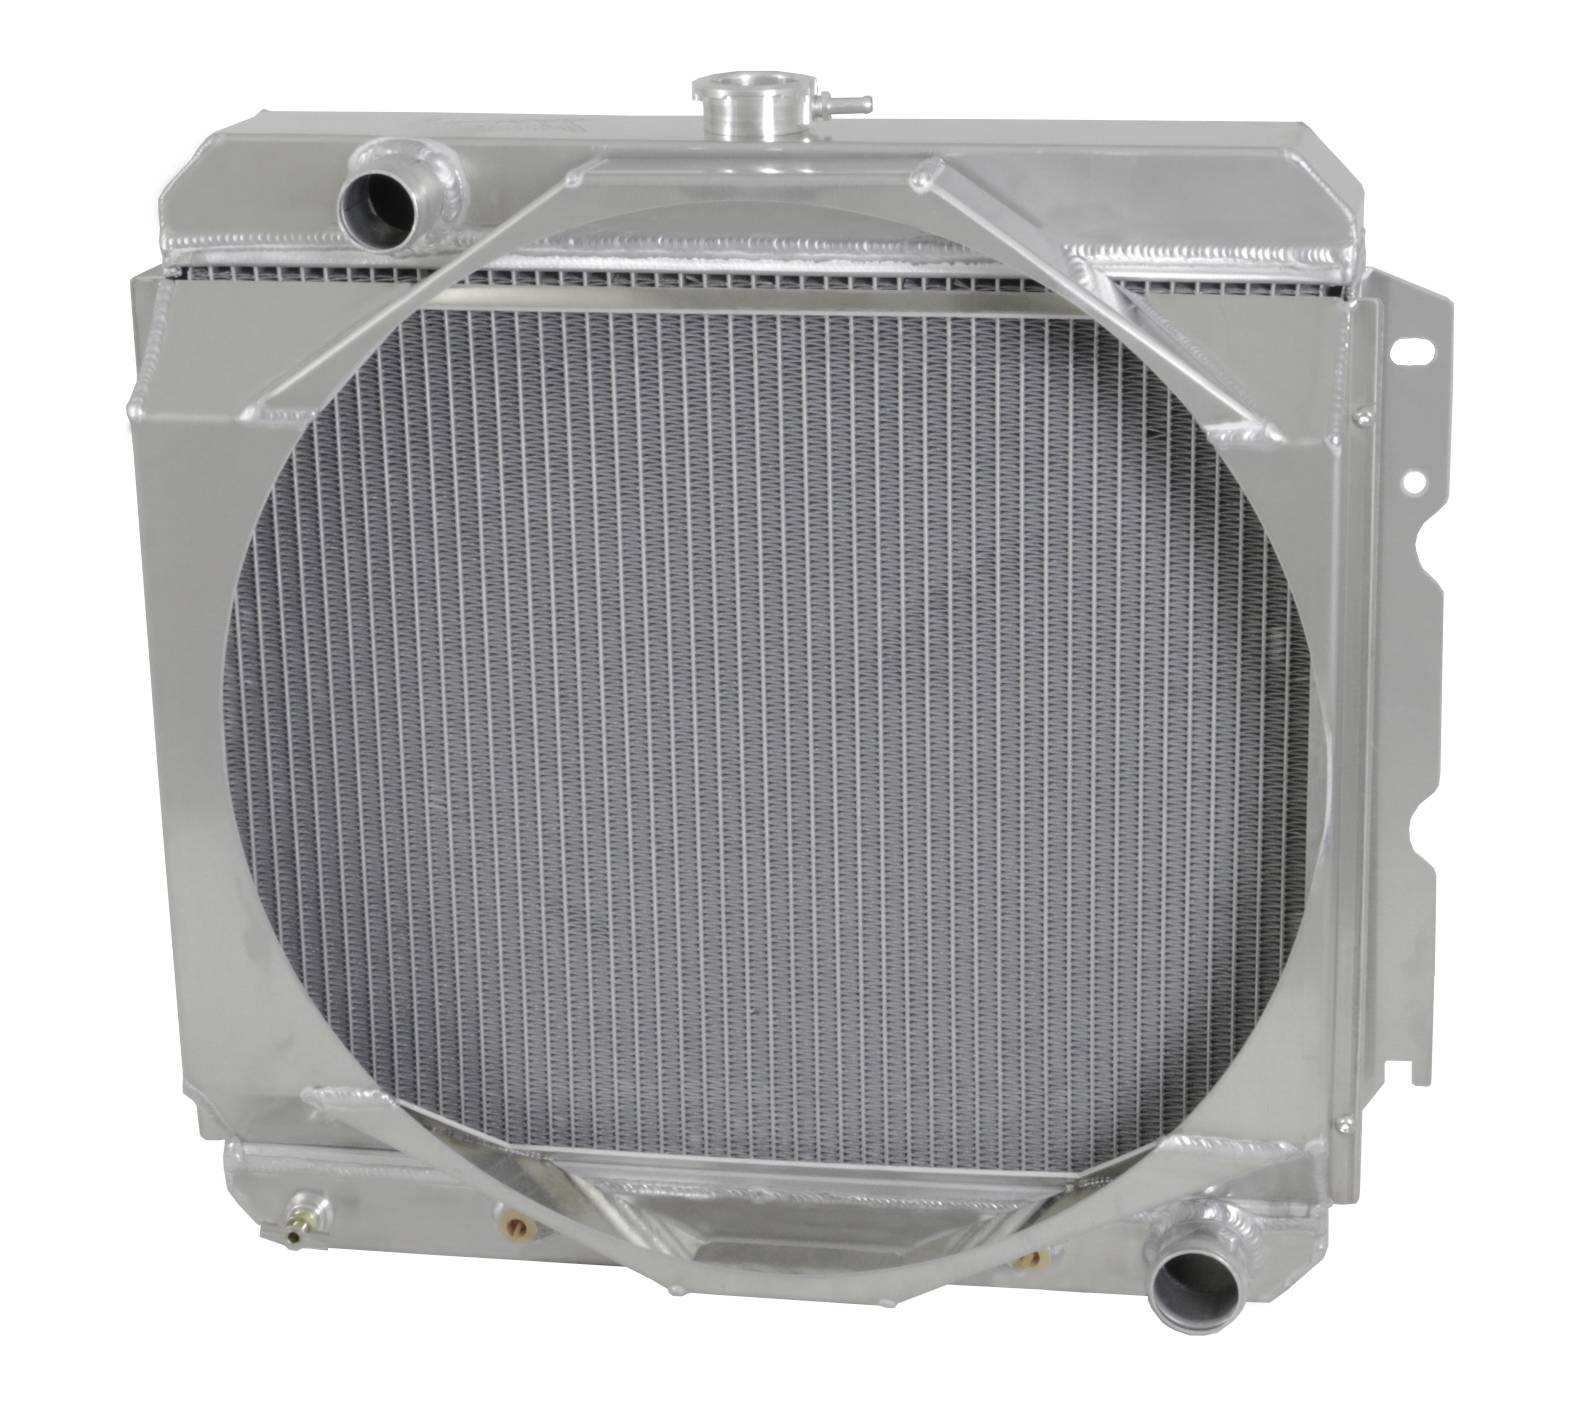 Wizard Cooling Inc - Wizard Cooling - 1970-73 22" Mopar Applications w/ OEM Style Shroud - 526-115